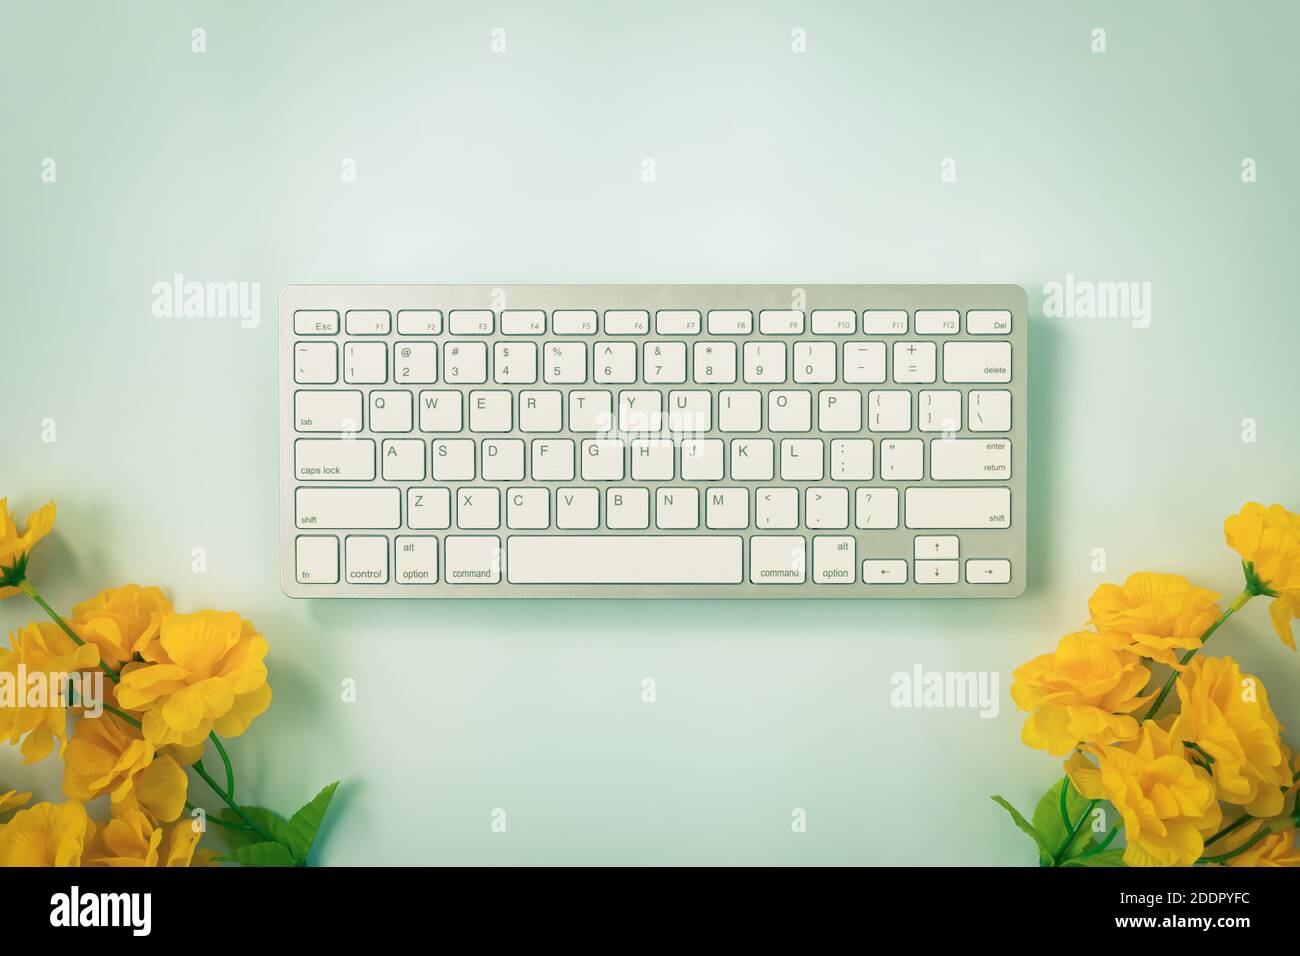 White Portable Computer Keyboard Keys or Keyboard Button and Yellow Flower at Bottom on Blue Pastel Minimalist Background in Vintage Tone Stock Photo